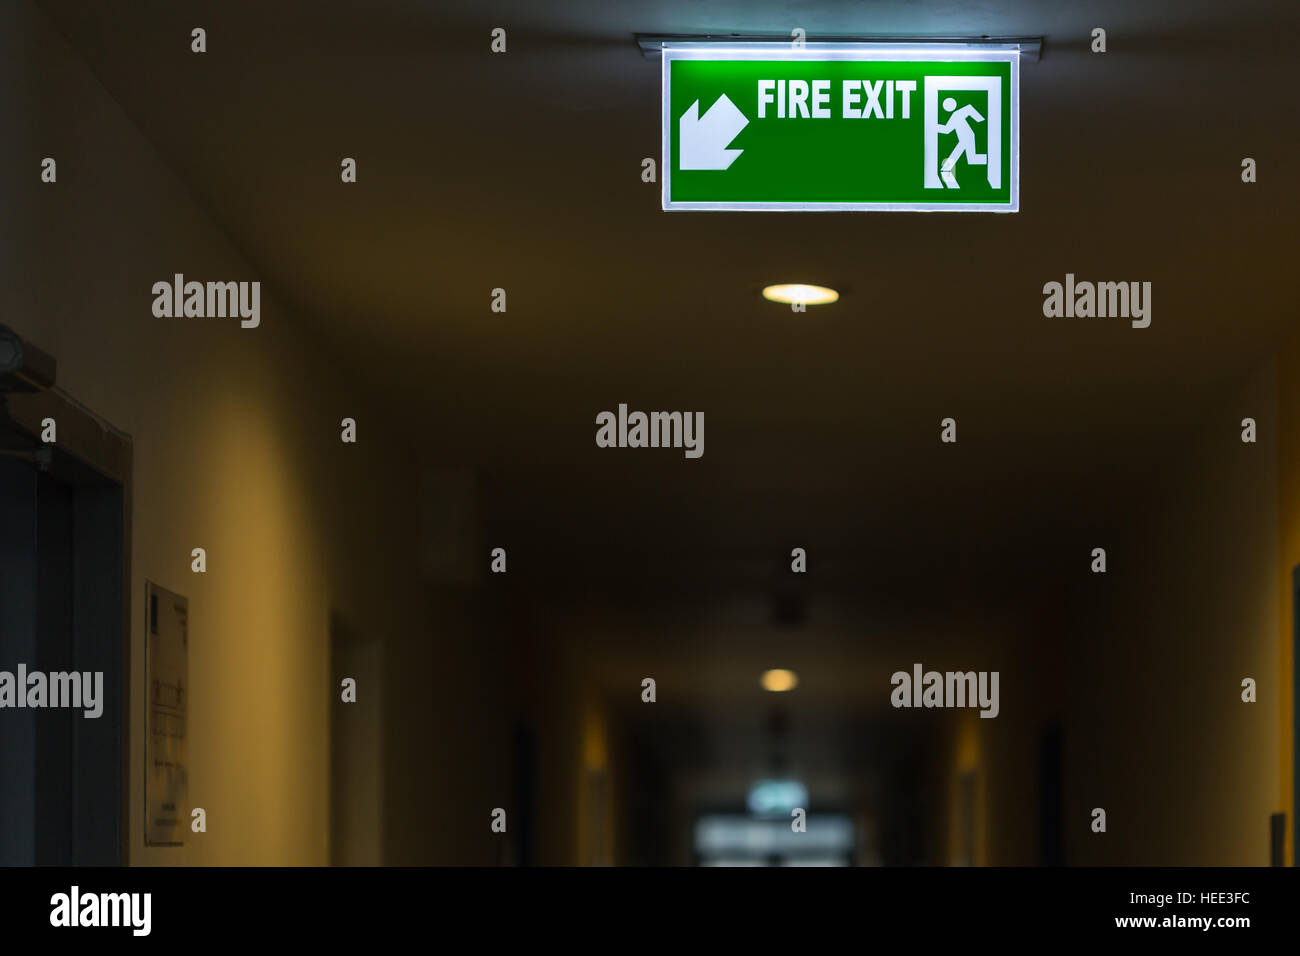 Green fire exit sign in hotel corridor Stock Photo